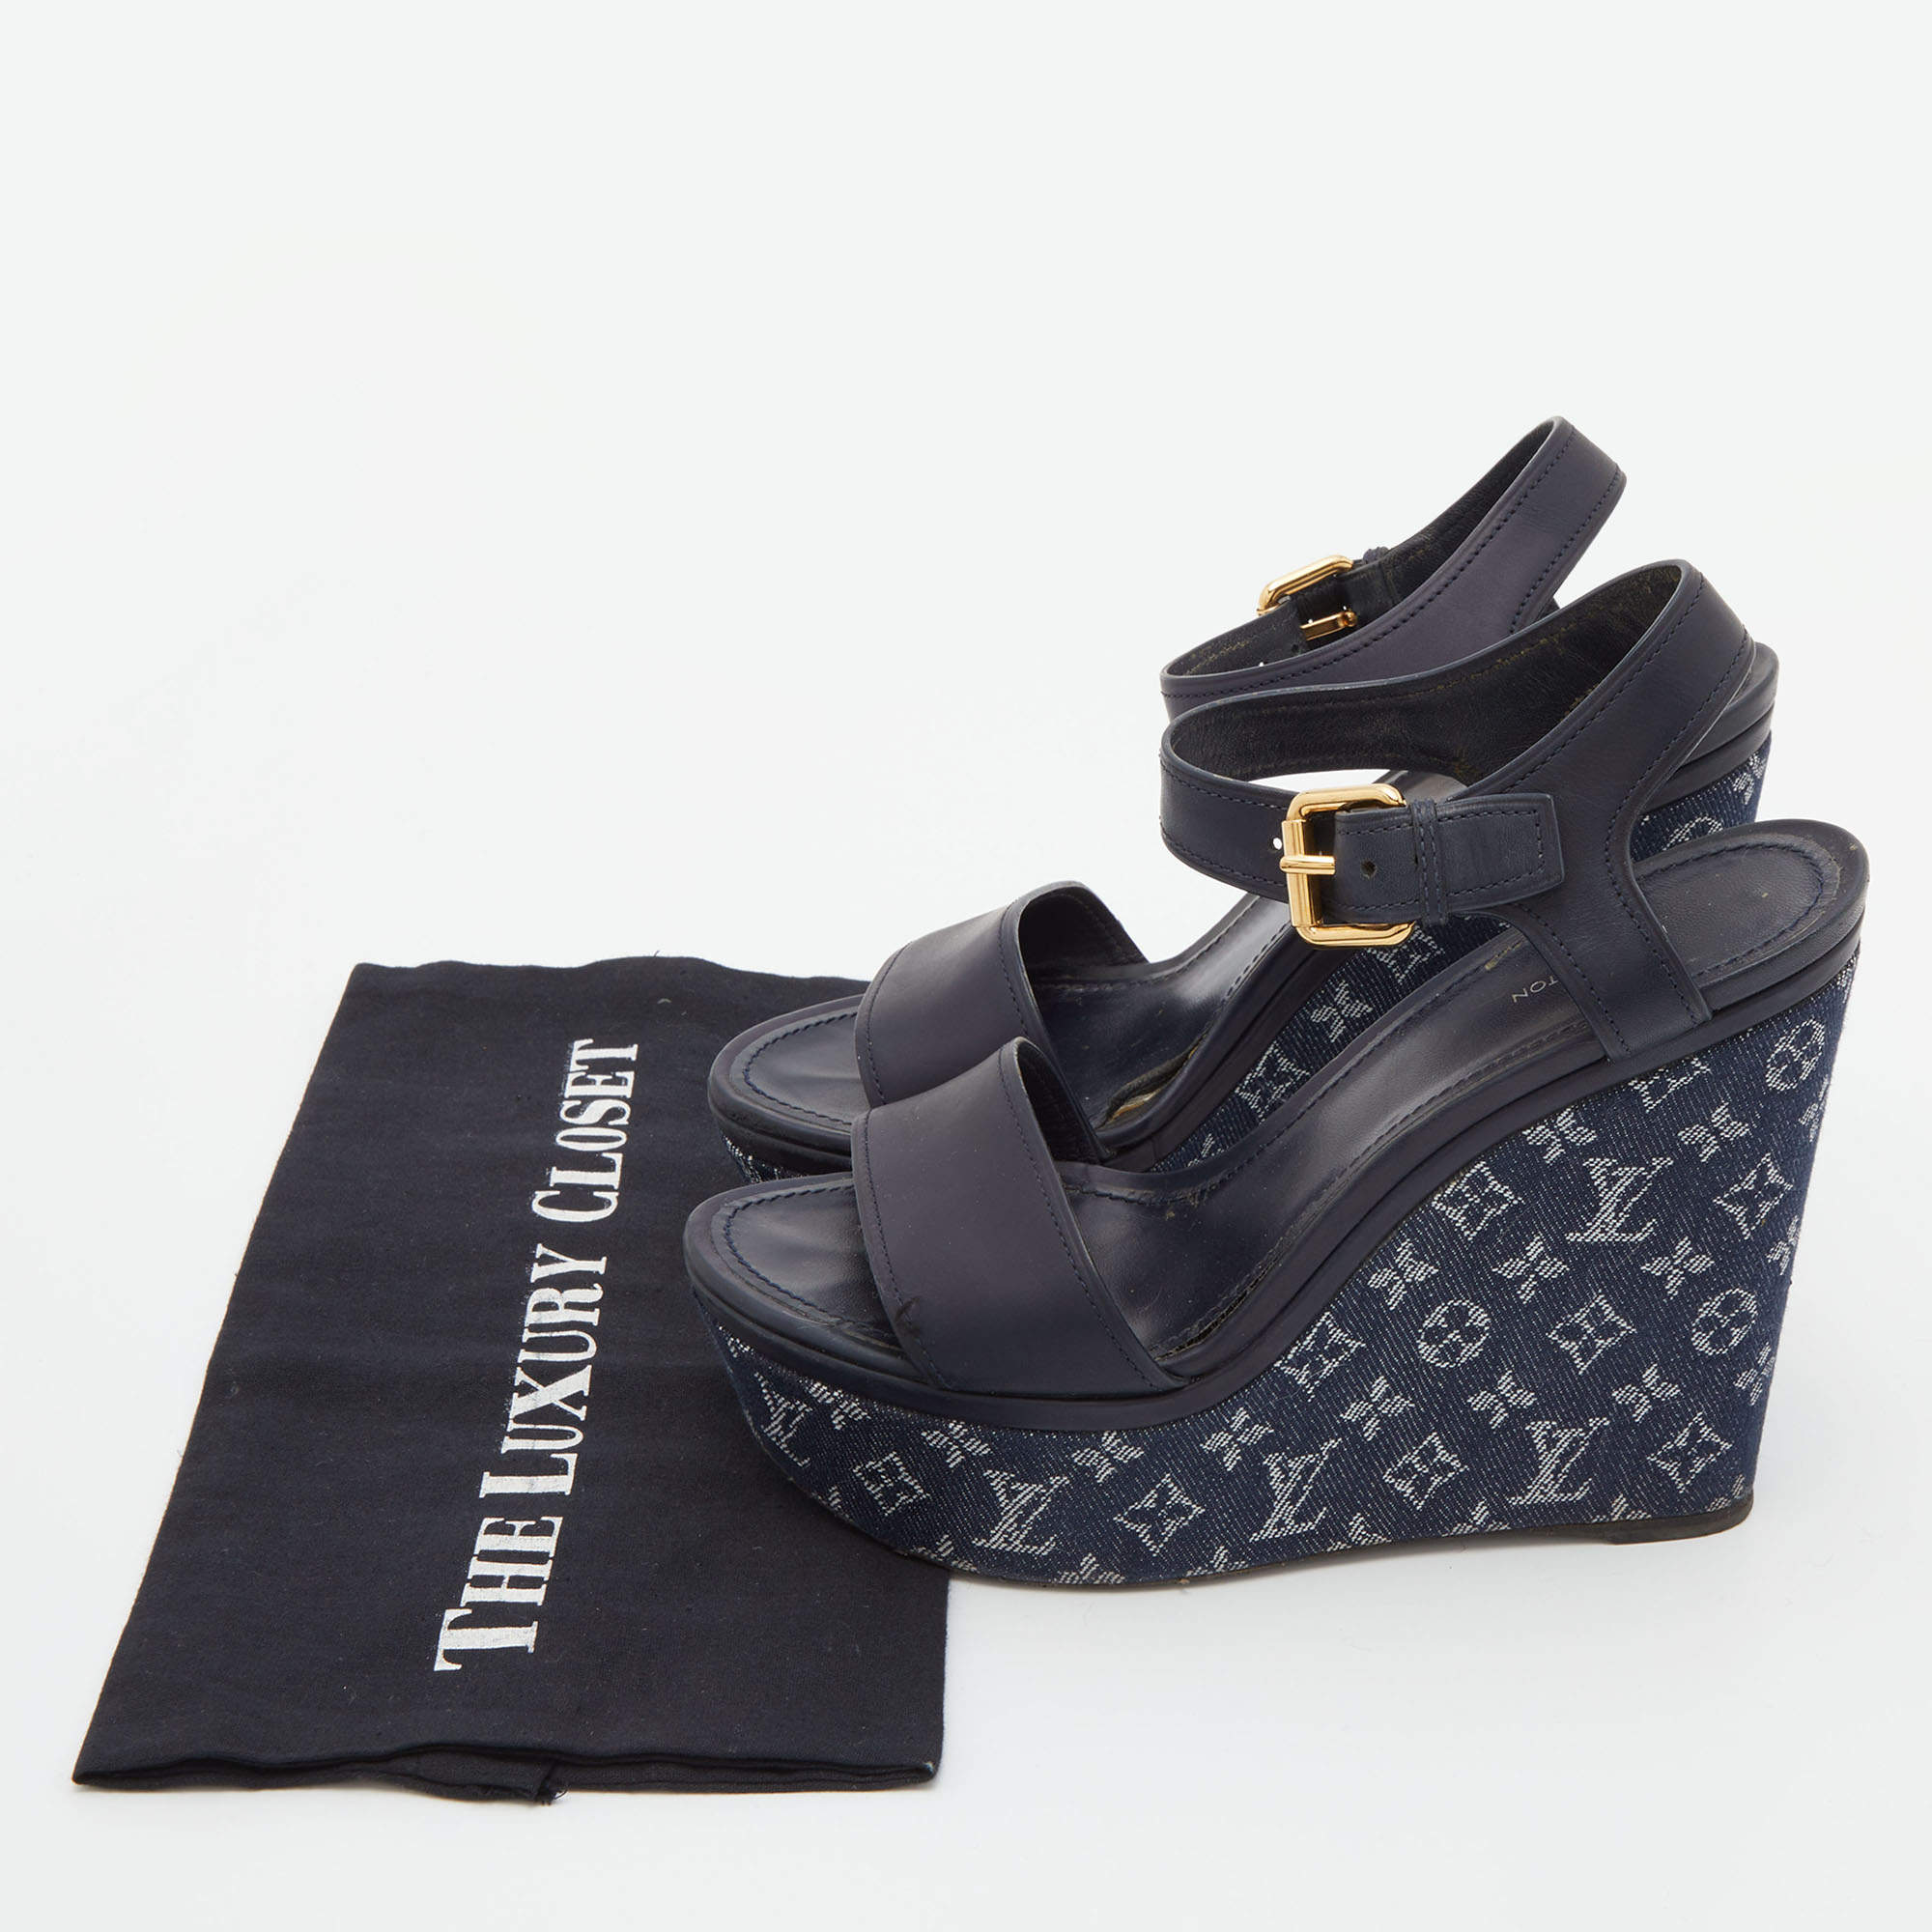 Louis Vuitton Navy Blue Leather and Monogram Denim Waterfall Sandals Size  38.5 - ShopStyle